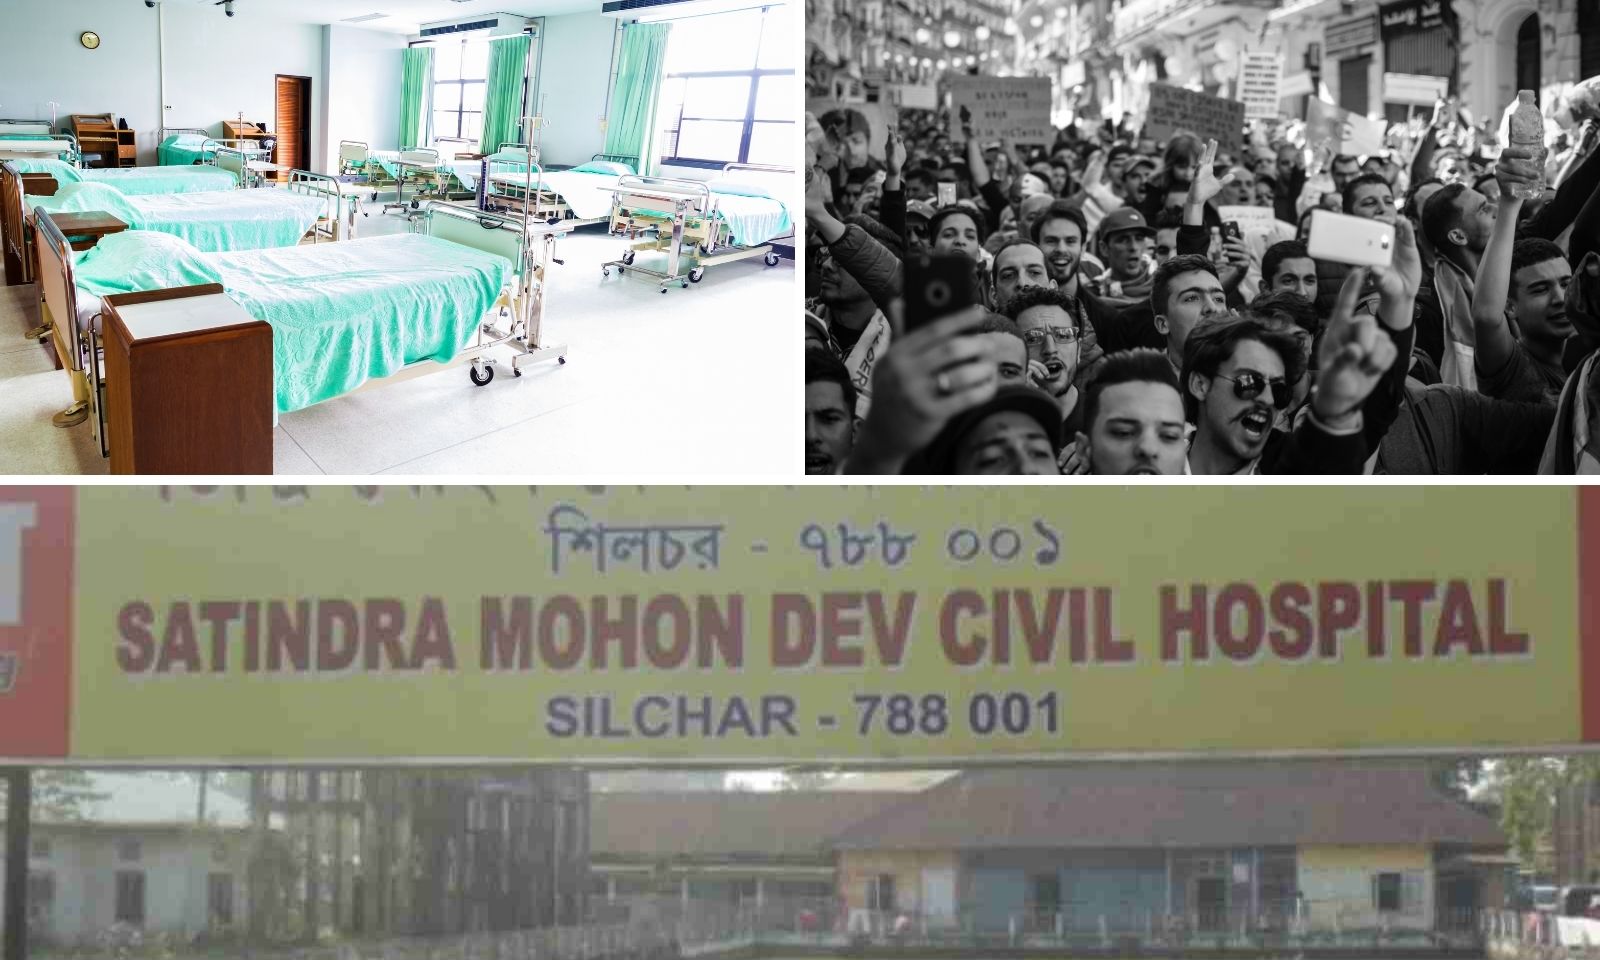 For the development of the civil hospitals, a movement has been called in Citizen meeting